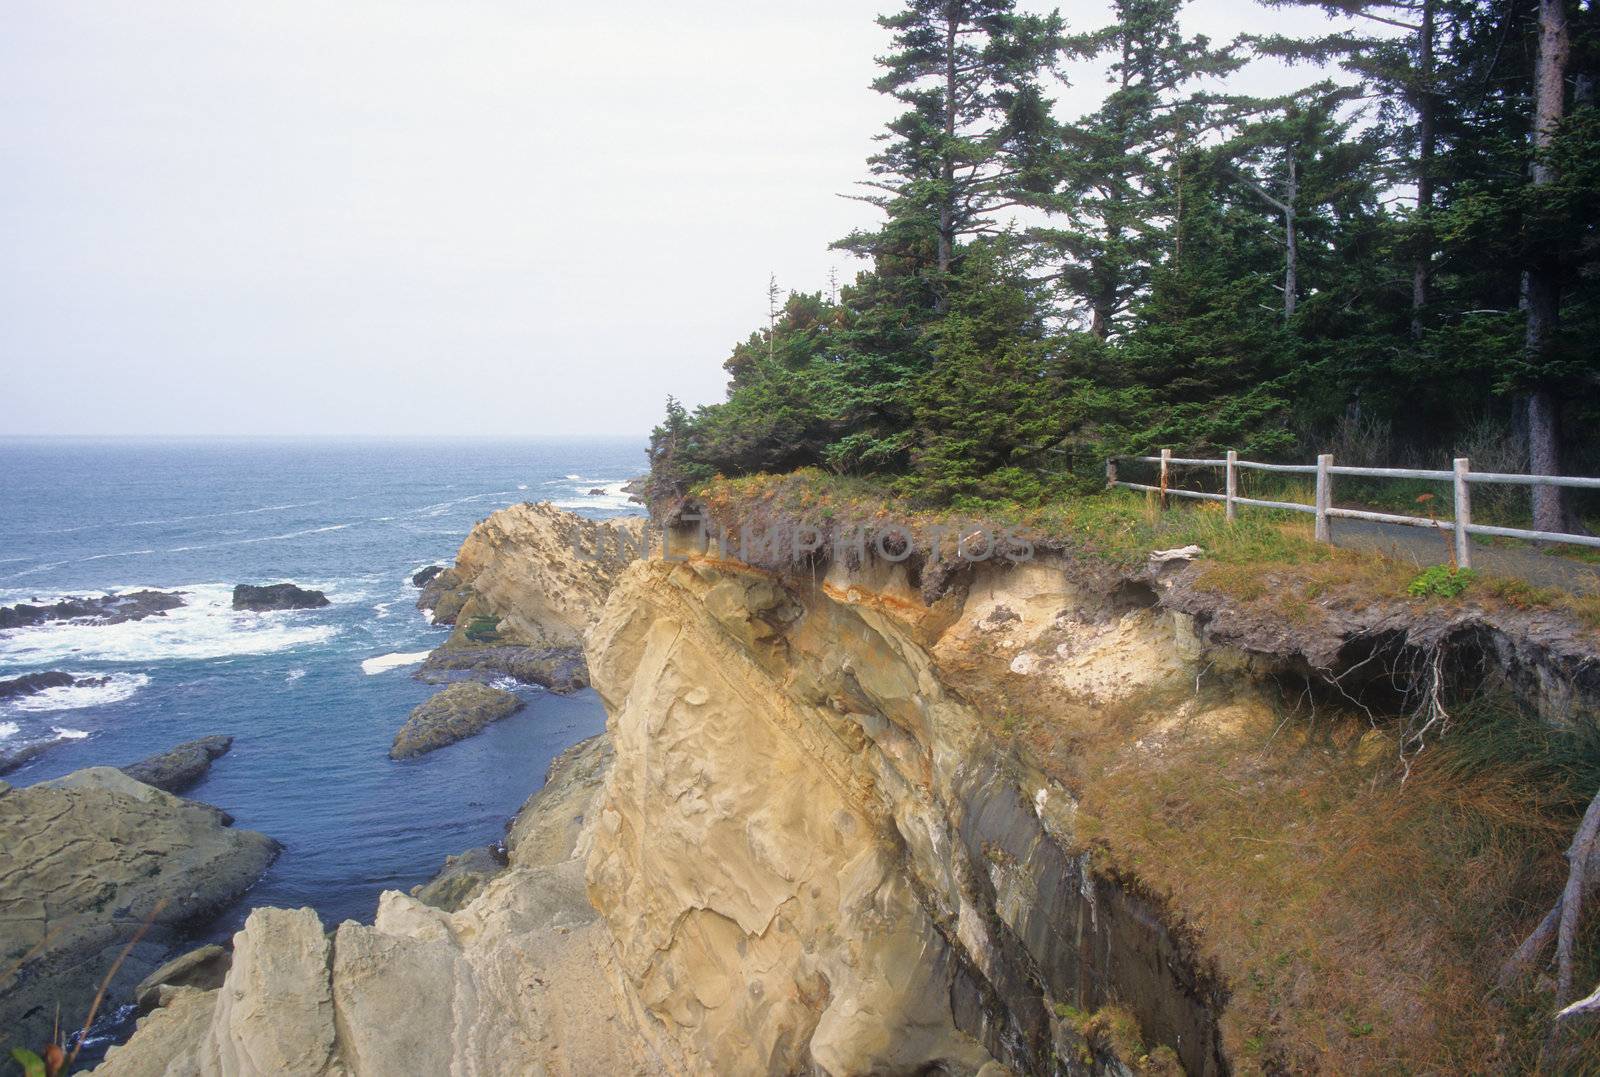 View of eroding cliffs at Shore Acres Park along the southern coast of Oregon.